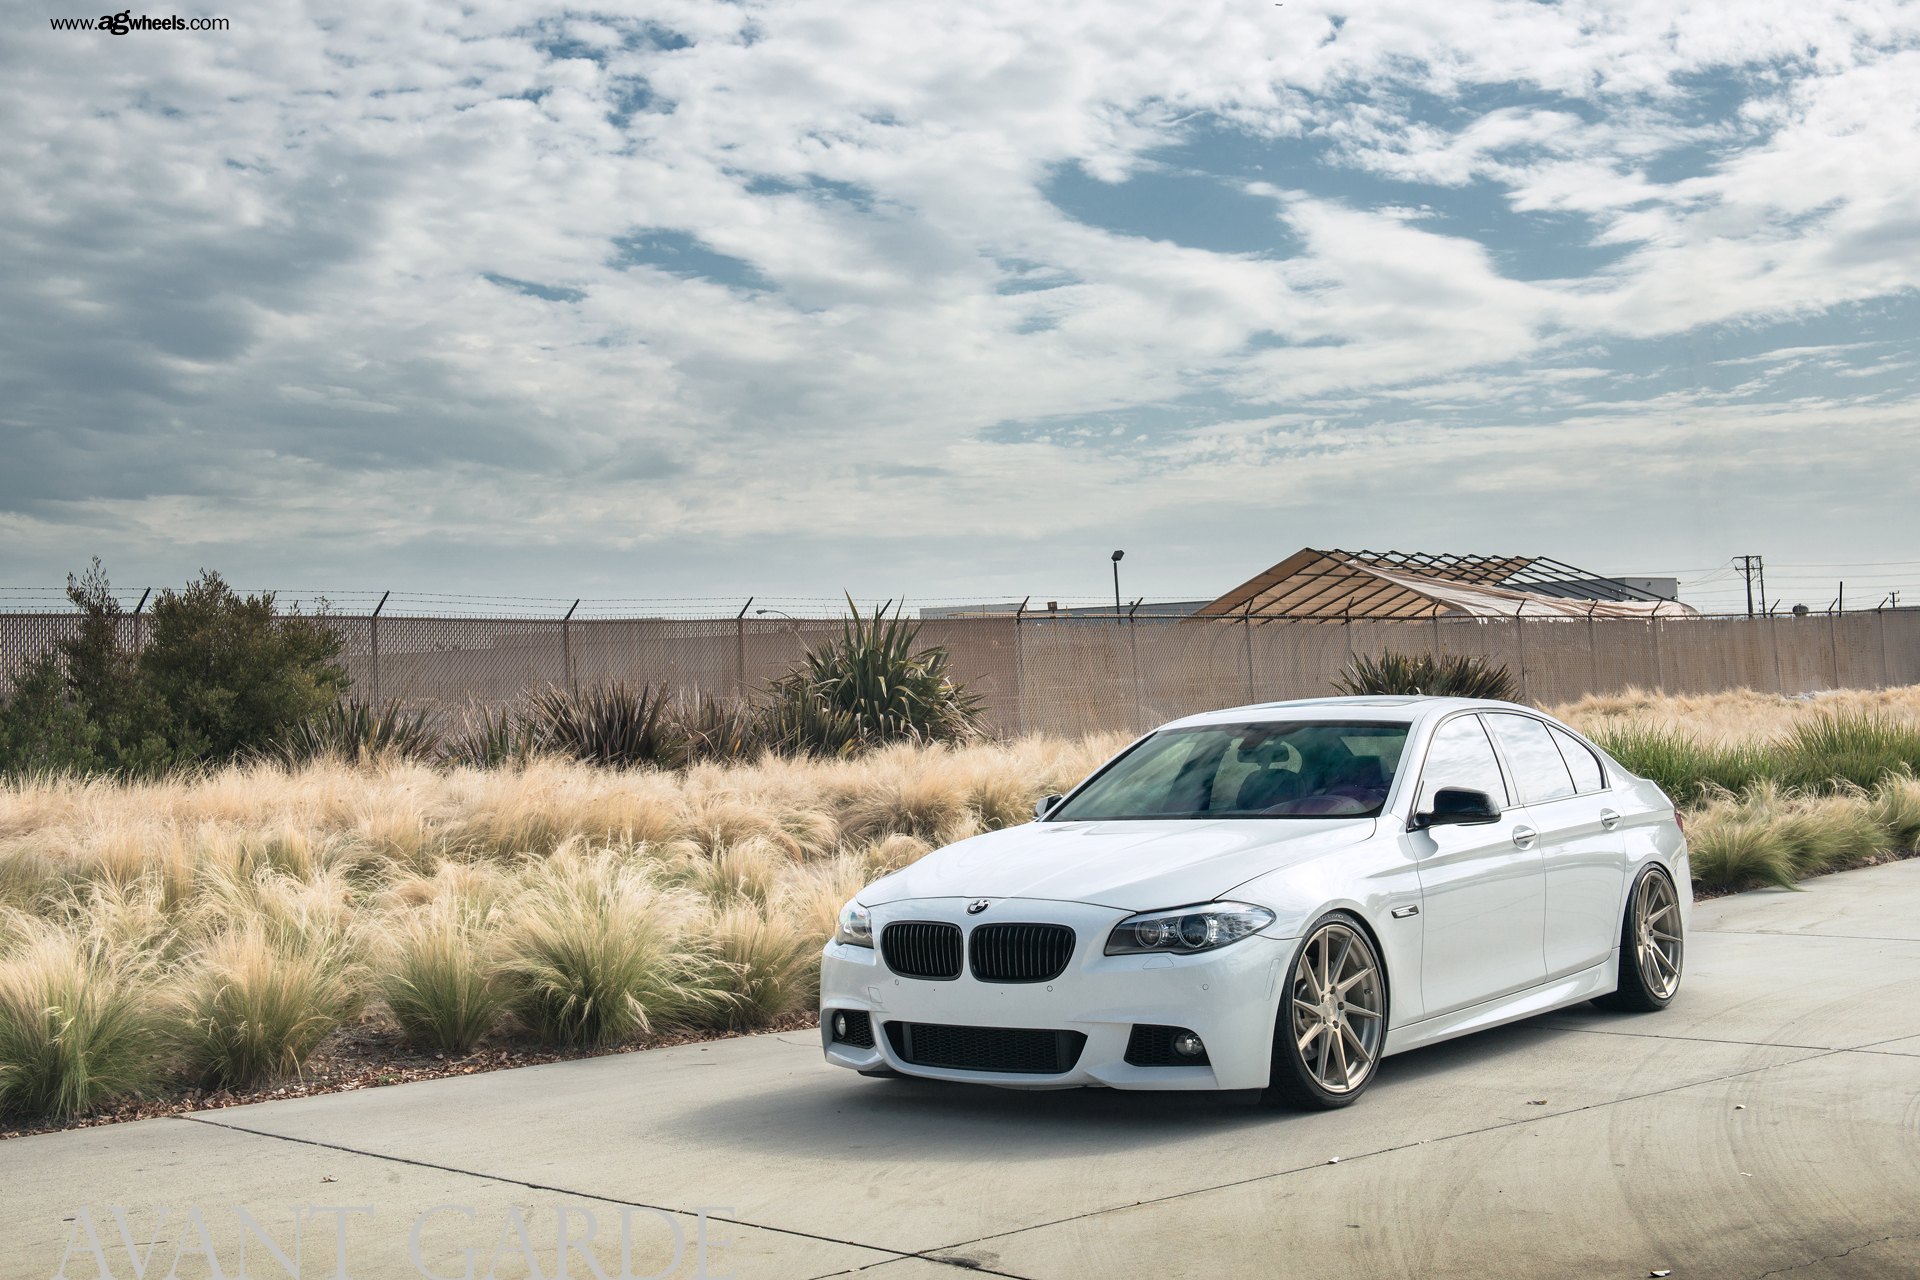 Front Bumper with Fog Lights on White BMW 5-Series - Photo by Avant Garde Wheels